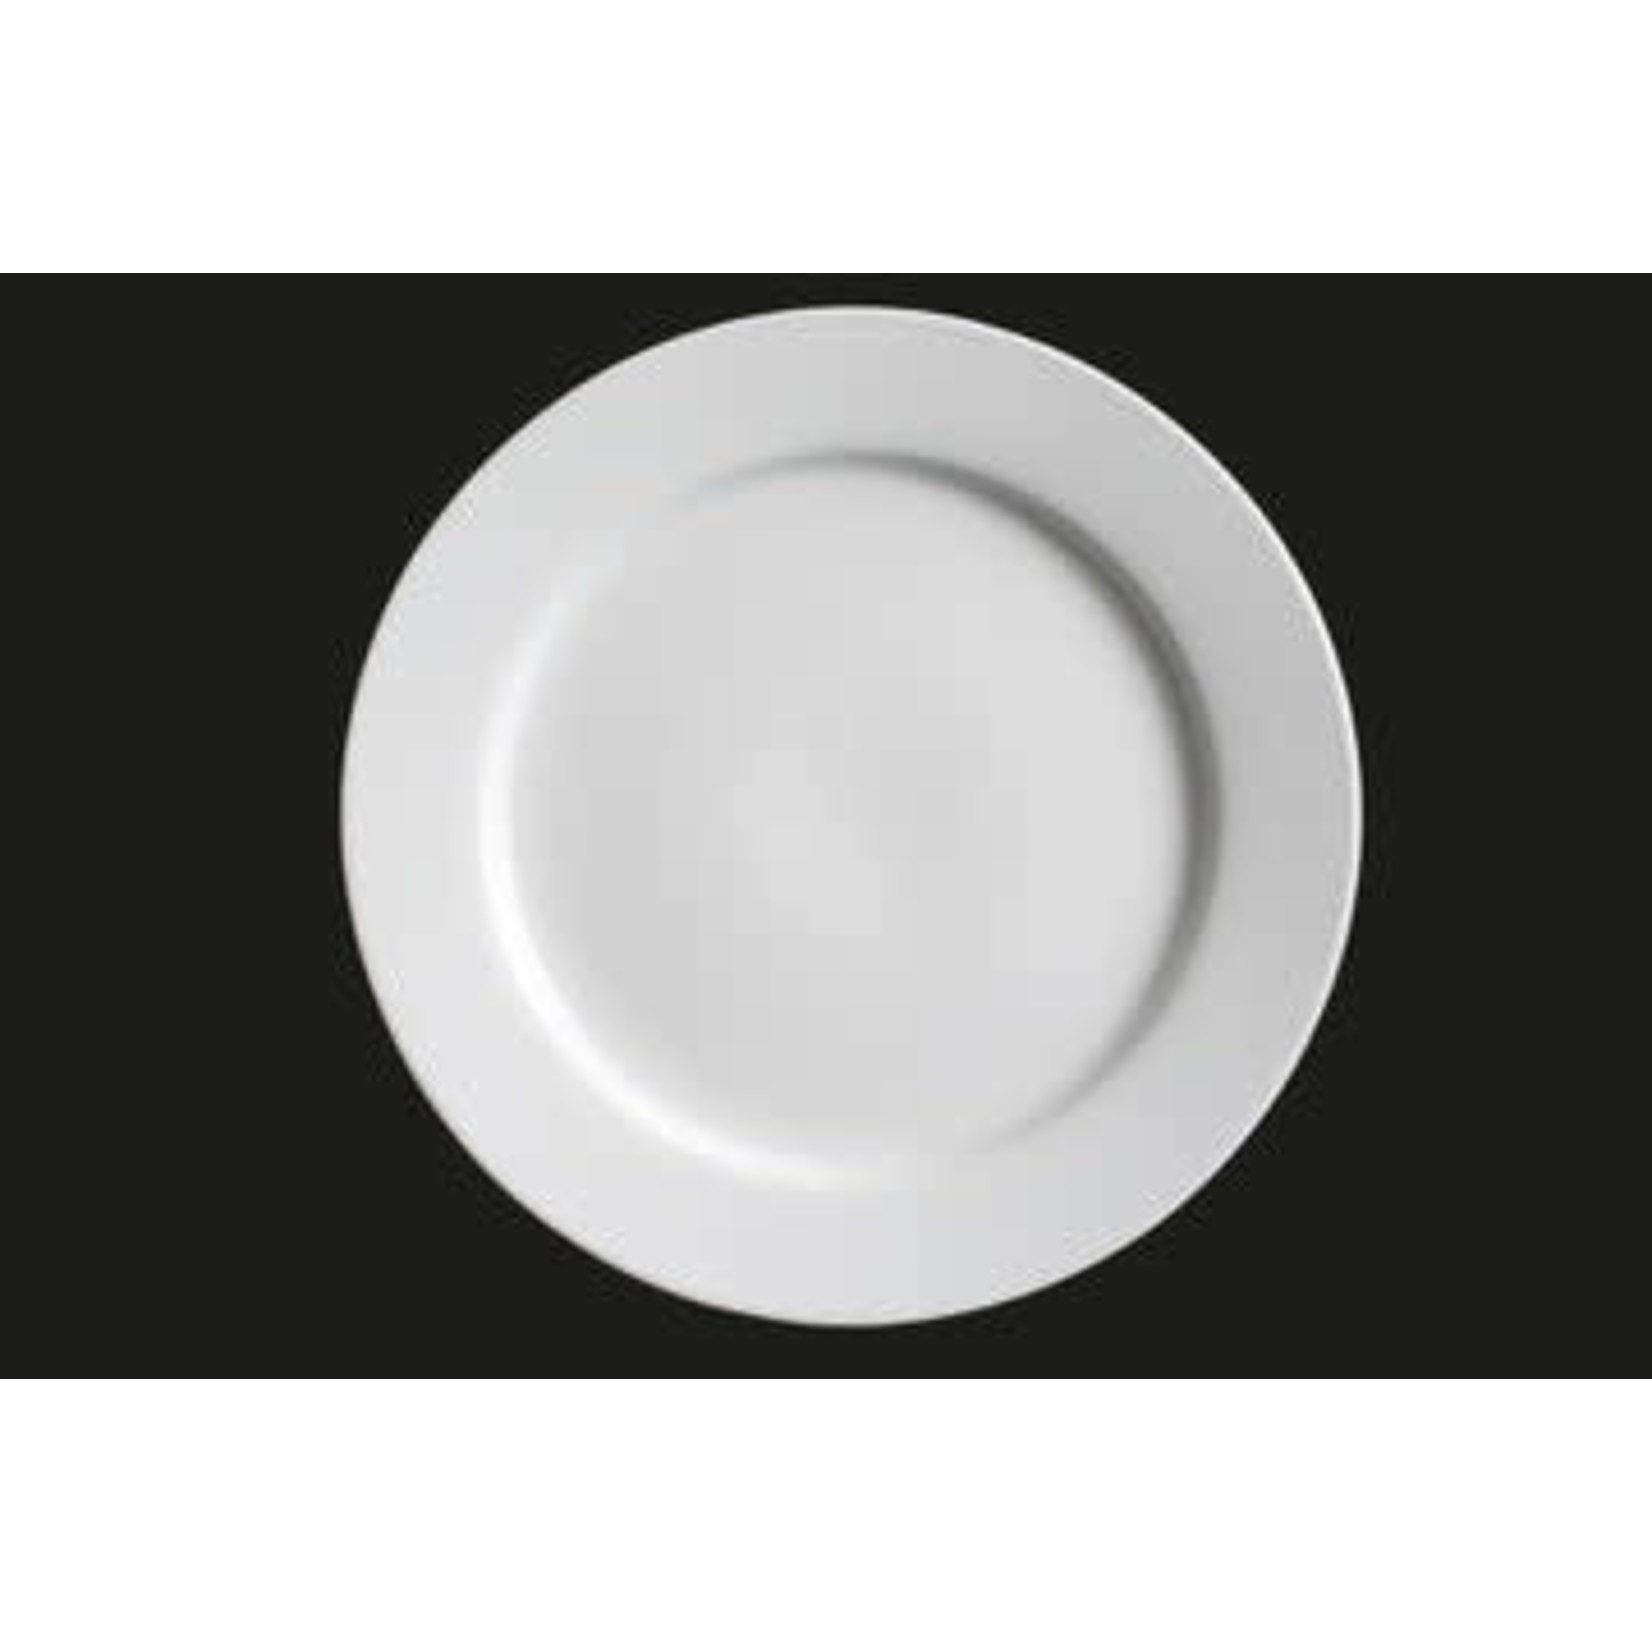 Palate and Plate AW-0010 6.25'' Rd. Bread & Butter Plate 36/cs